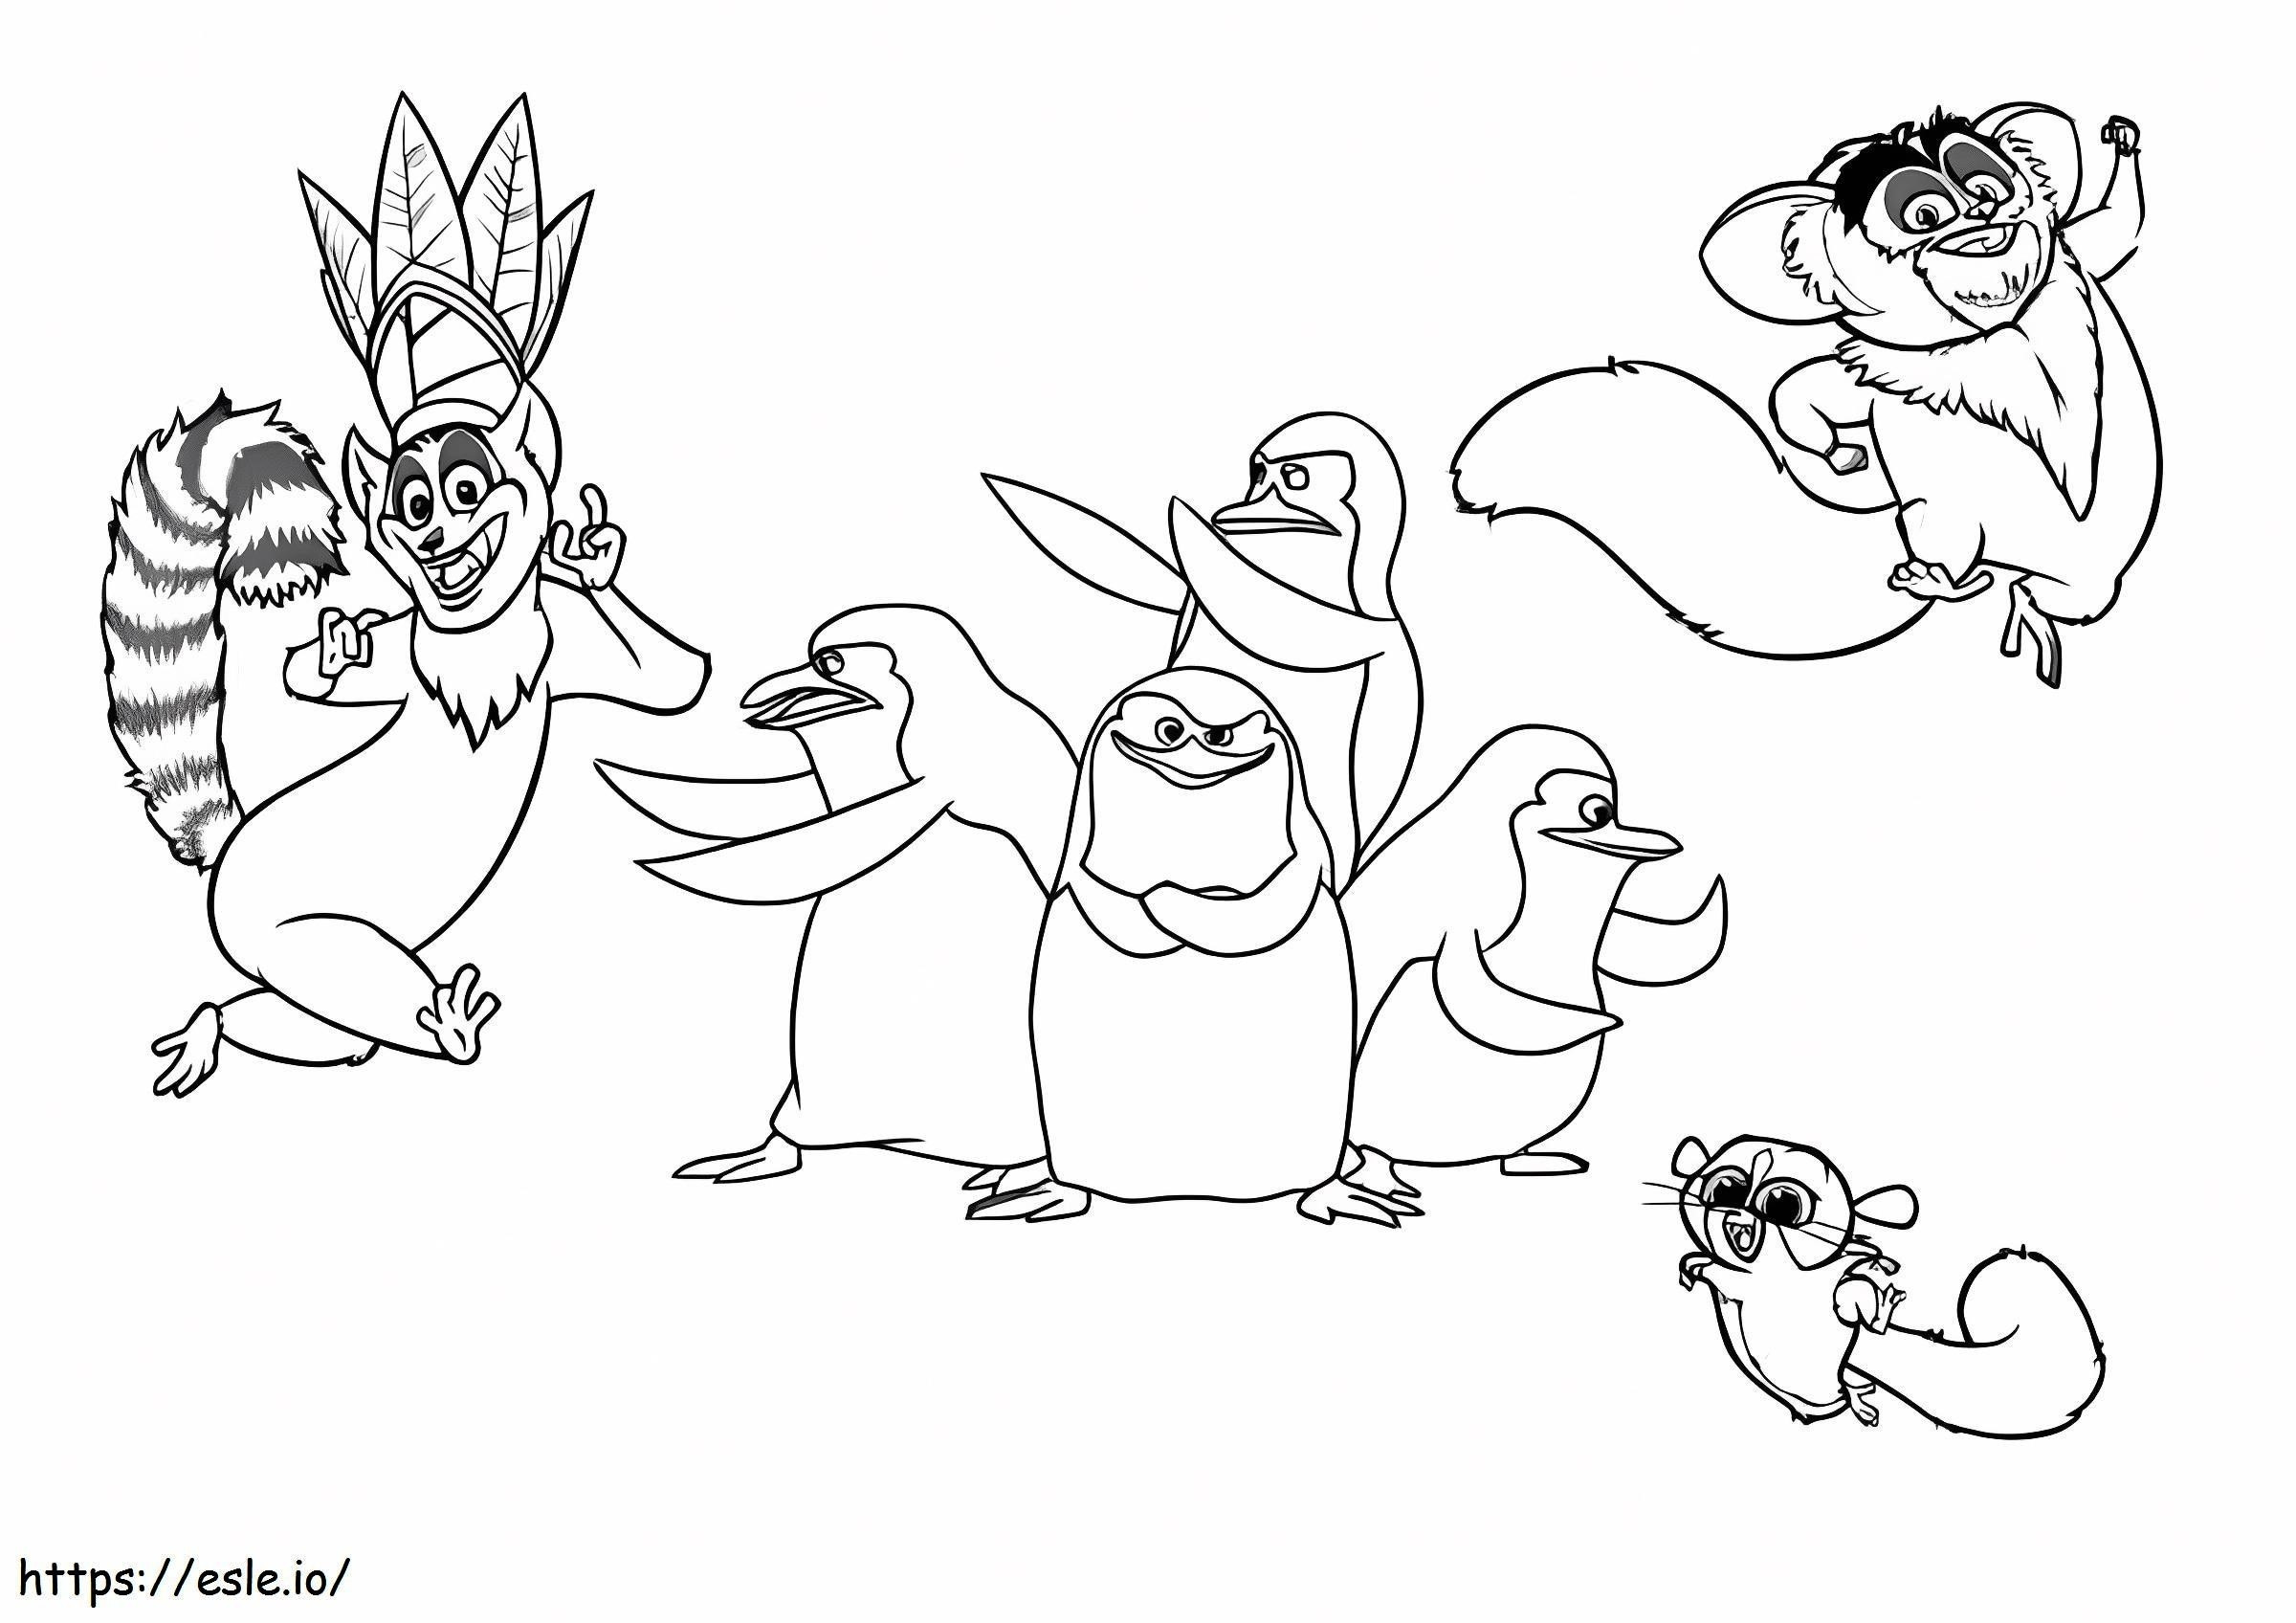 Three Lemurs And Three Penguins coloring page